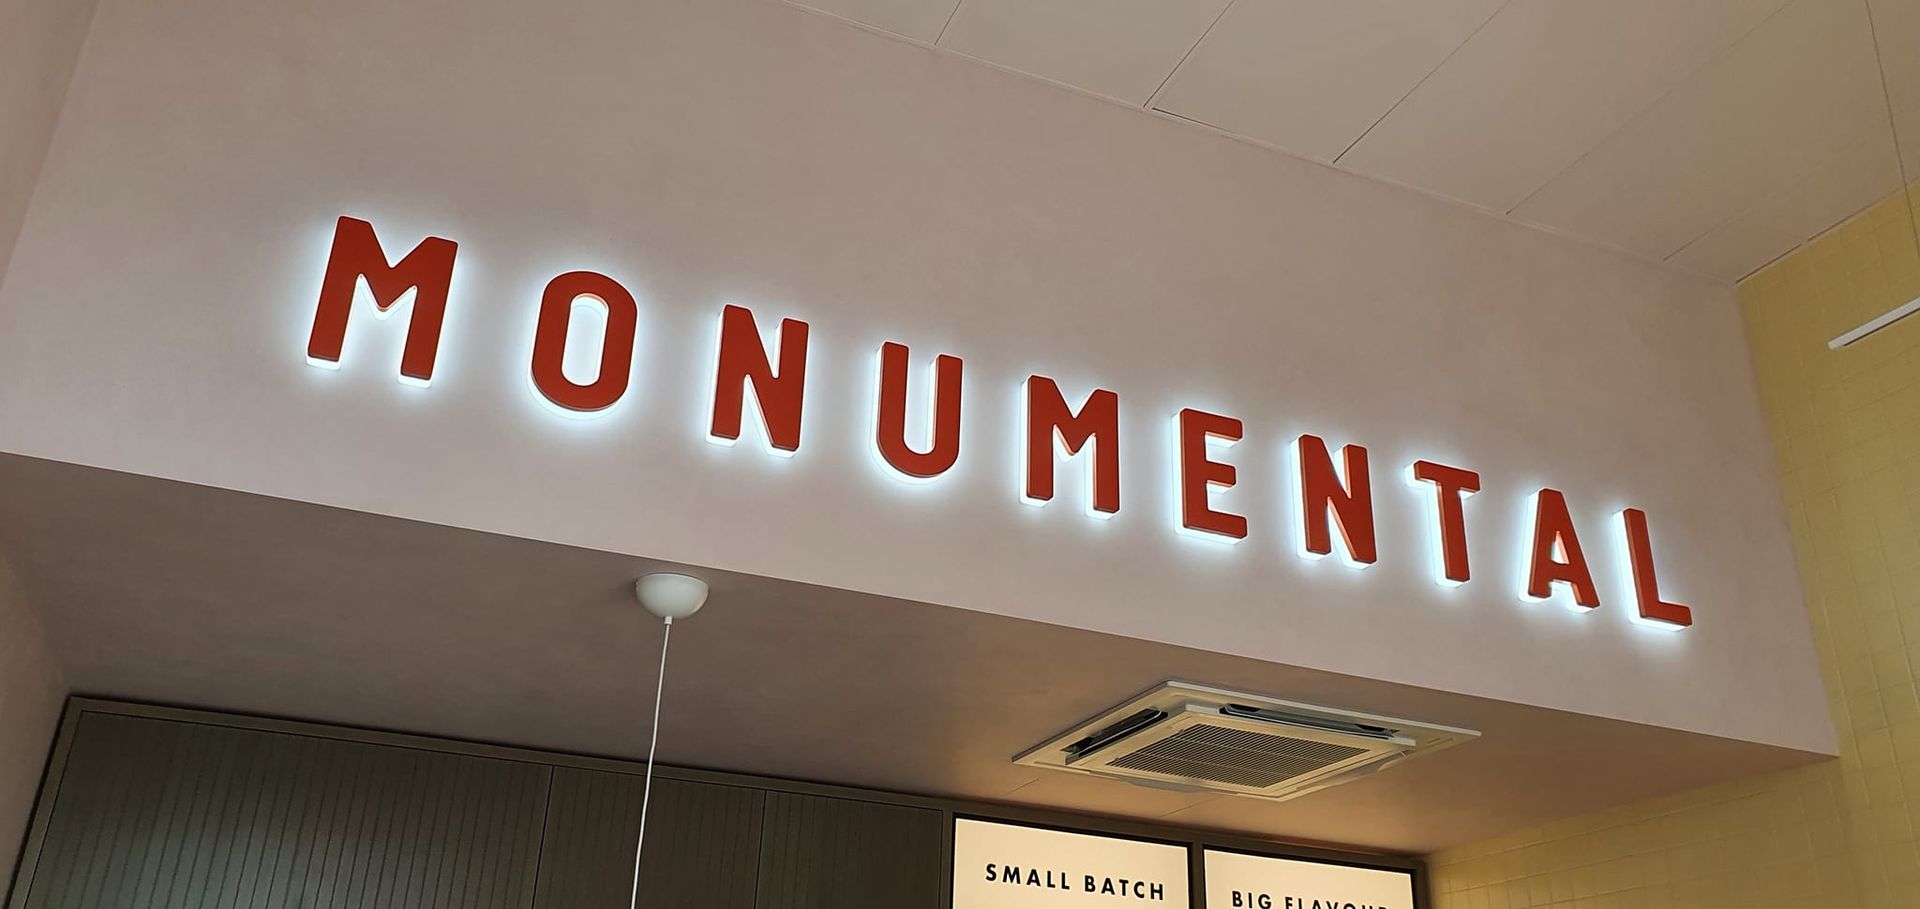 Sign Above a Doorway That Says Monumental — We Design & Manufacture Signage in the Albury-Wodonga, NSW